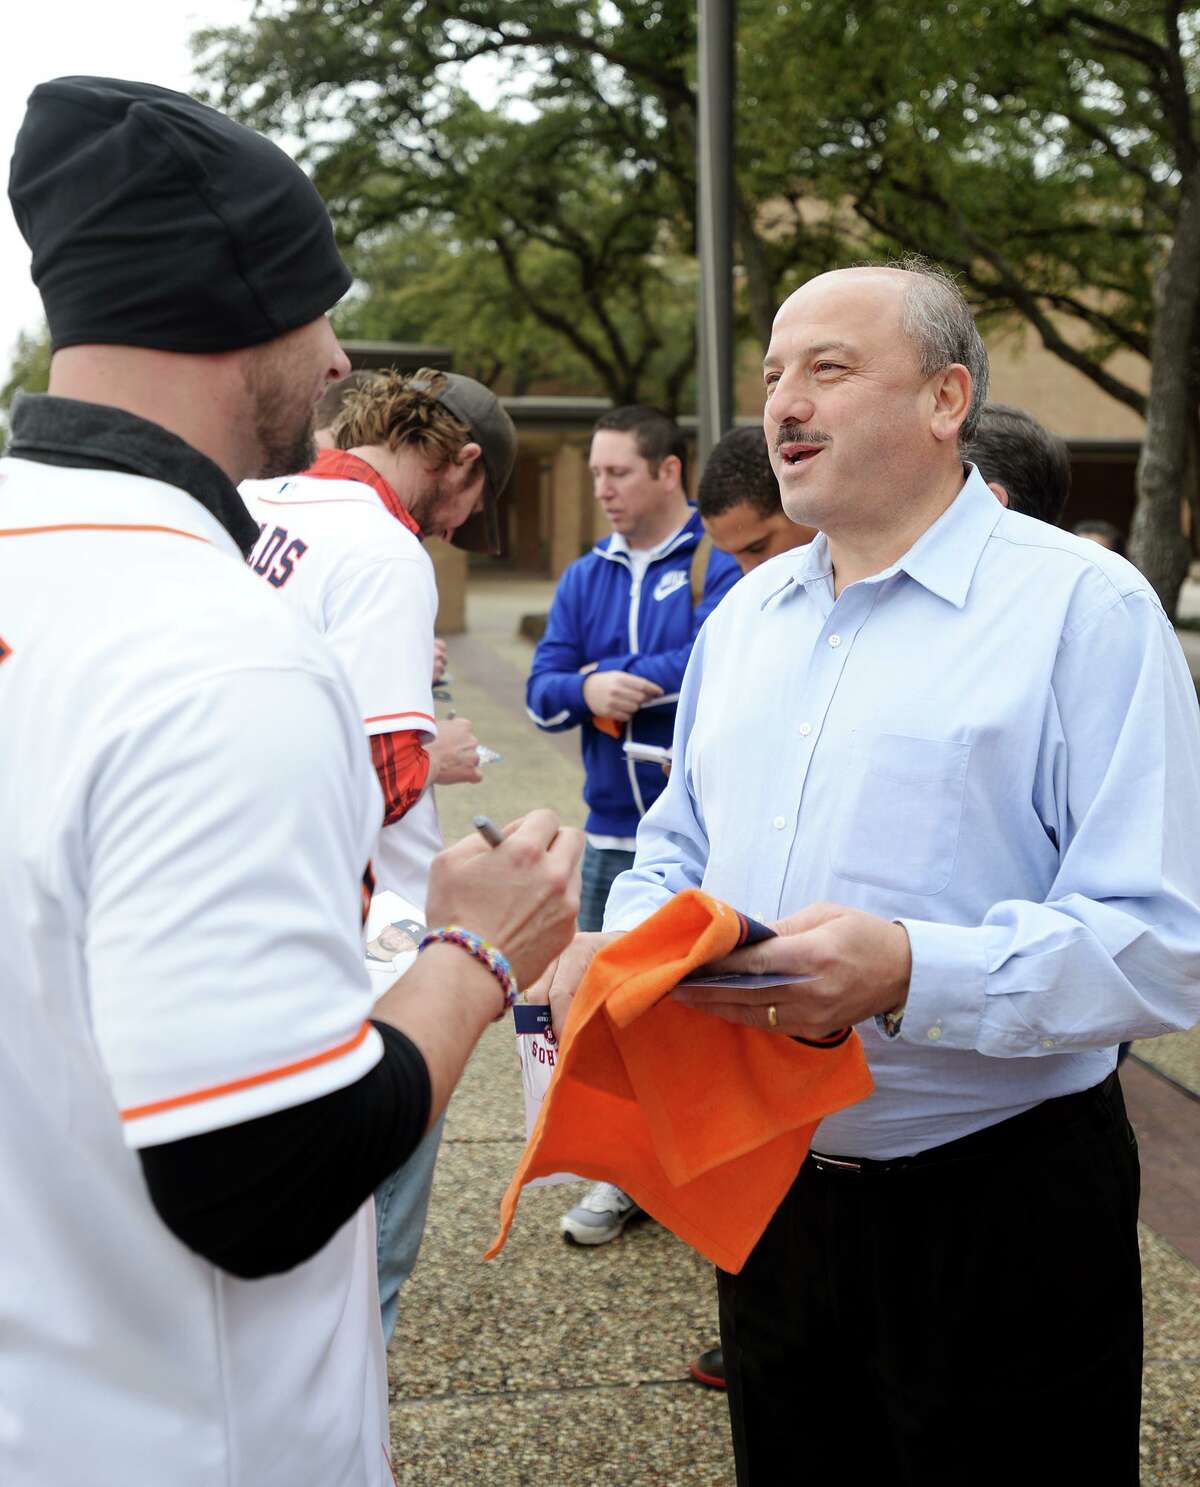 Jesse Crain, left, talks with fan Joseph Majdalani after signing autographs outside Beaumont City Hall on Thursday morning. The Houston Astros Tour stopped in Beaumont on Thursday, bringing three current players and a former player to City Hall, Chick-Fil-A, and Academy Sports and Outdoors. Jesse Crain, Josh Fields, and Lucas Harrell, as well as former pitcher John Hudek, signed autographs for fans and attended a Houston Astros flag raising at their first stop at Beaumont City Hall. Photo taken Thursday, 1/23/14 Jake Daniels/@JakeD_in_SETX